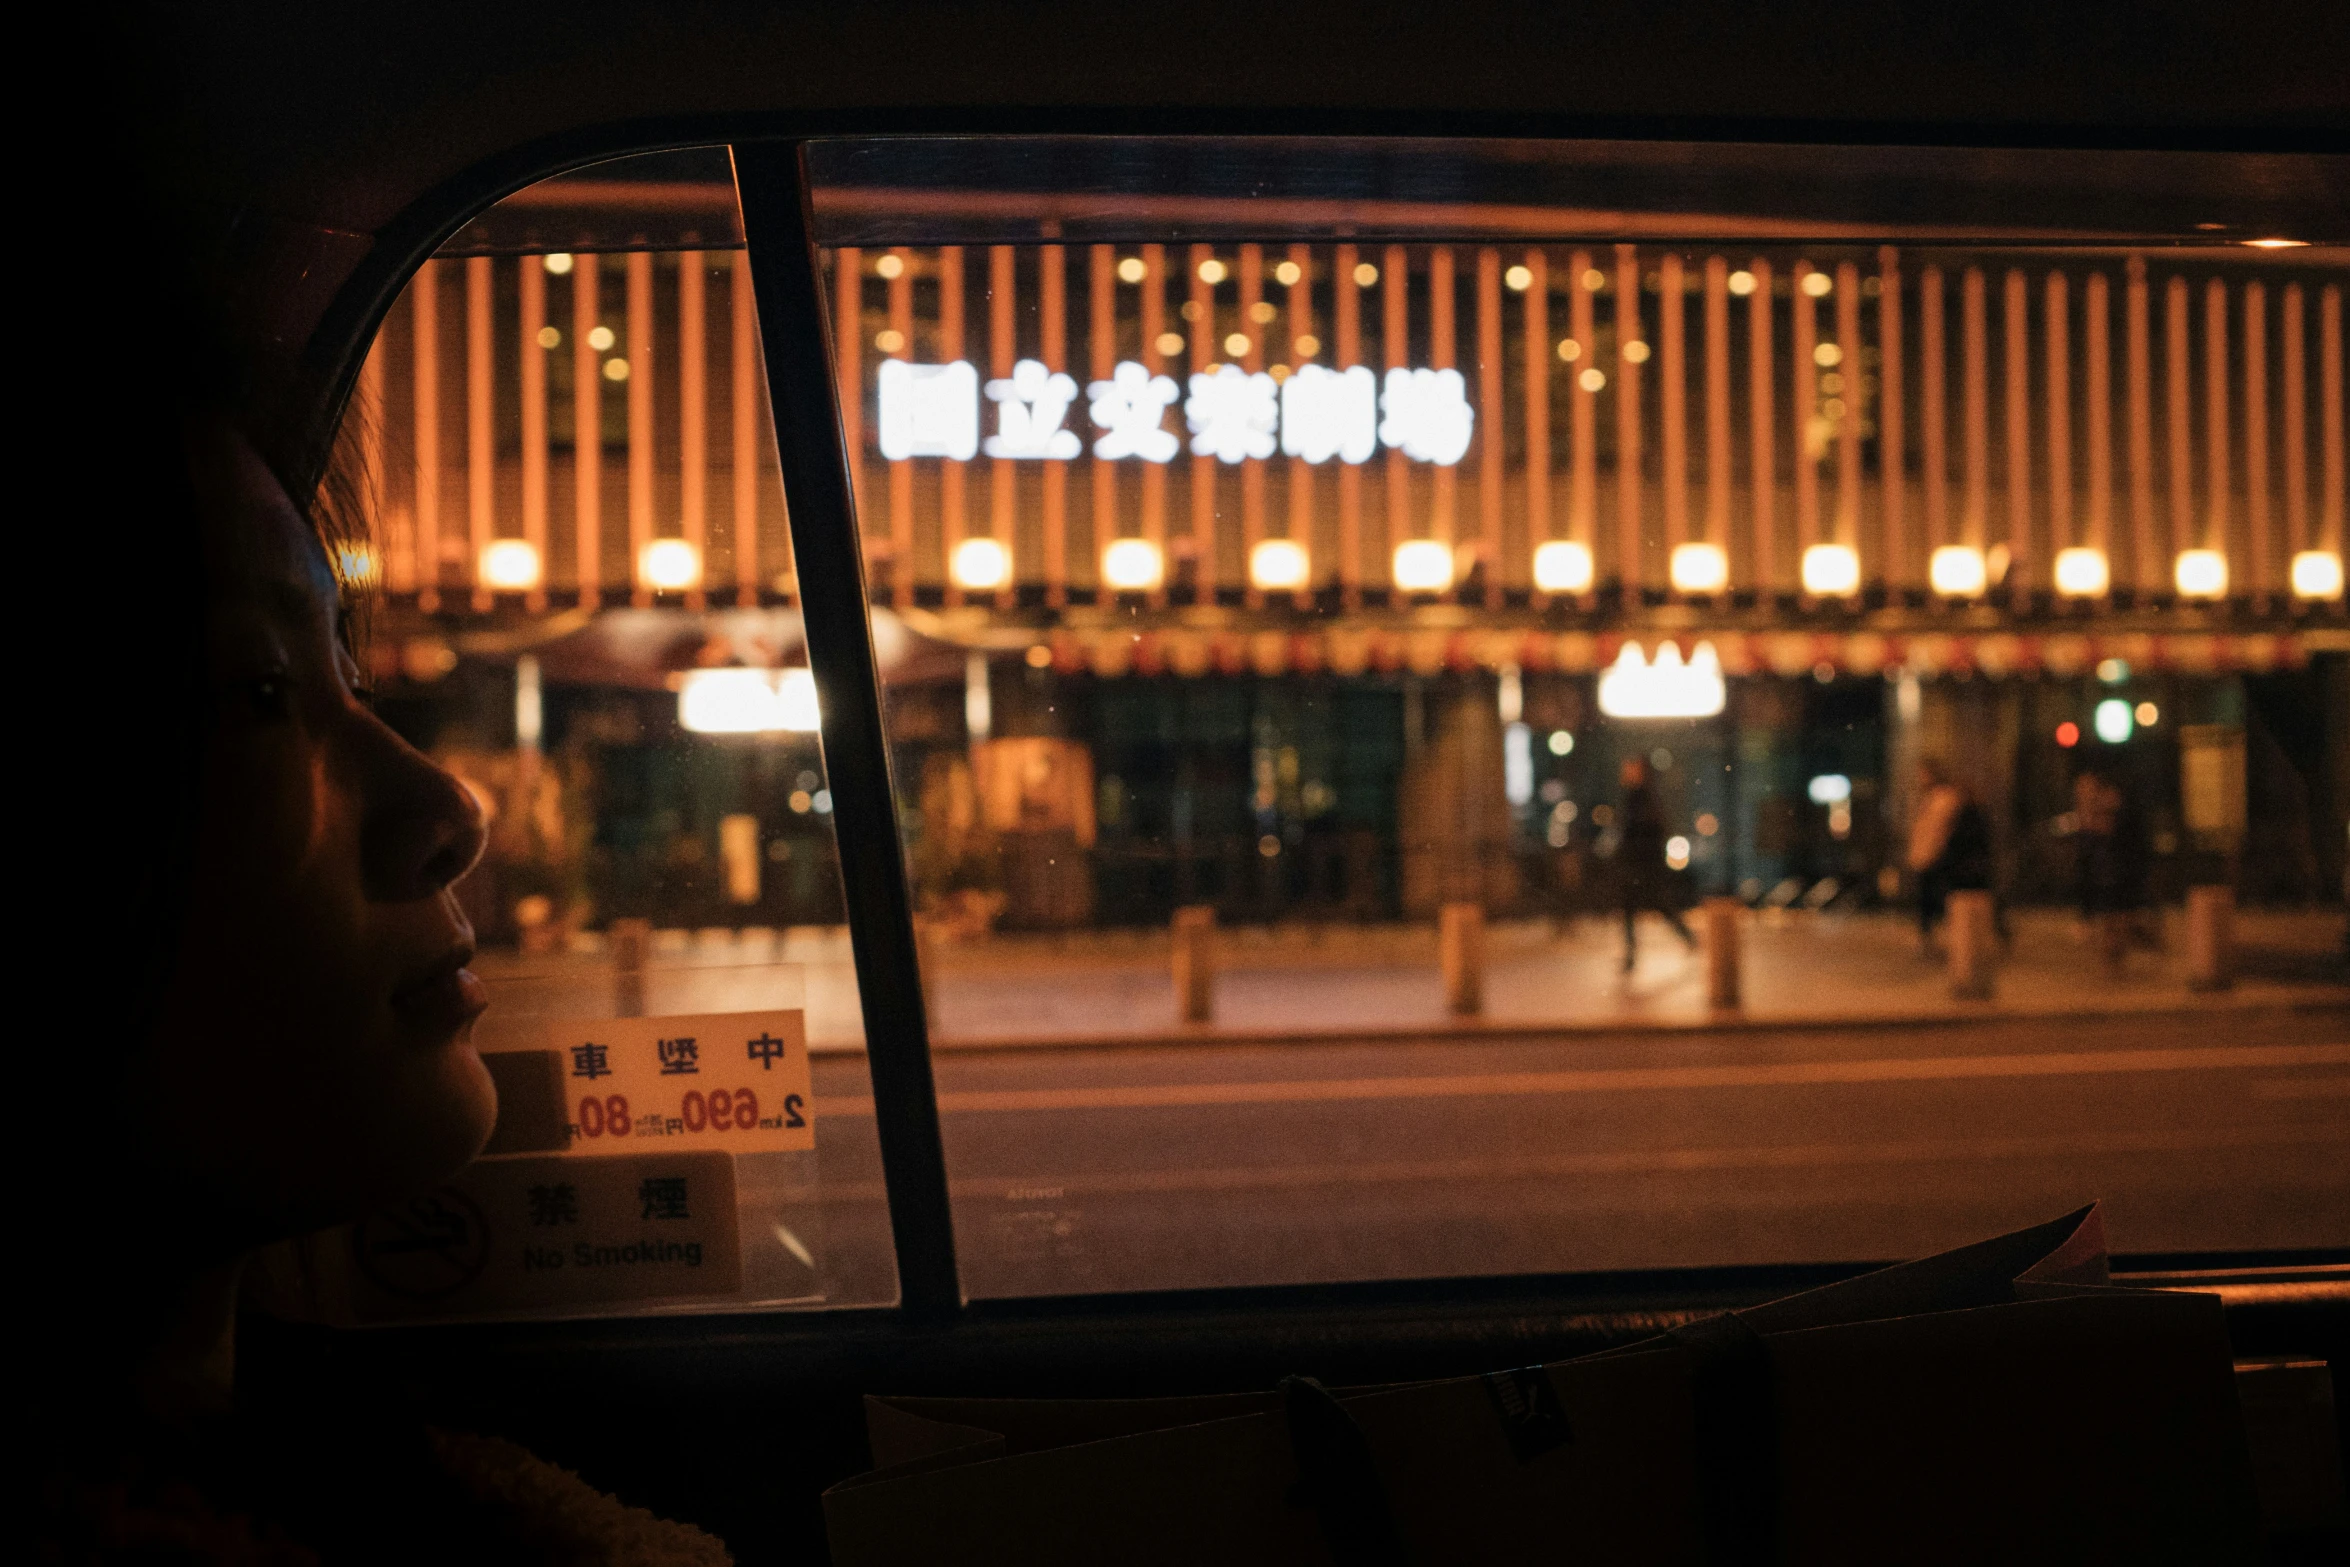 a person sitting in a vehicle outside a building at night